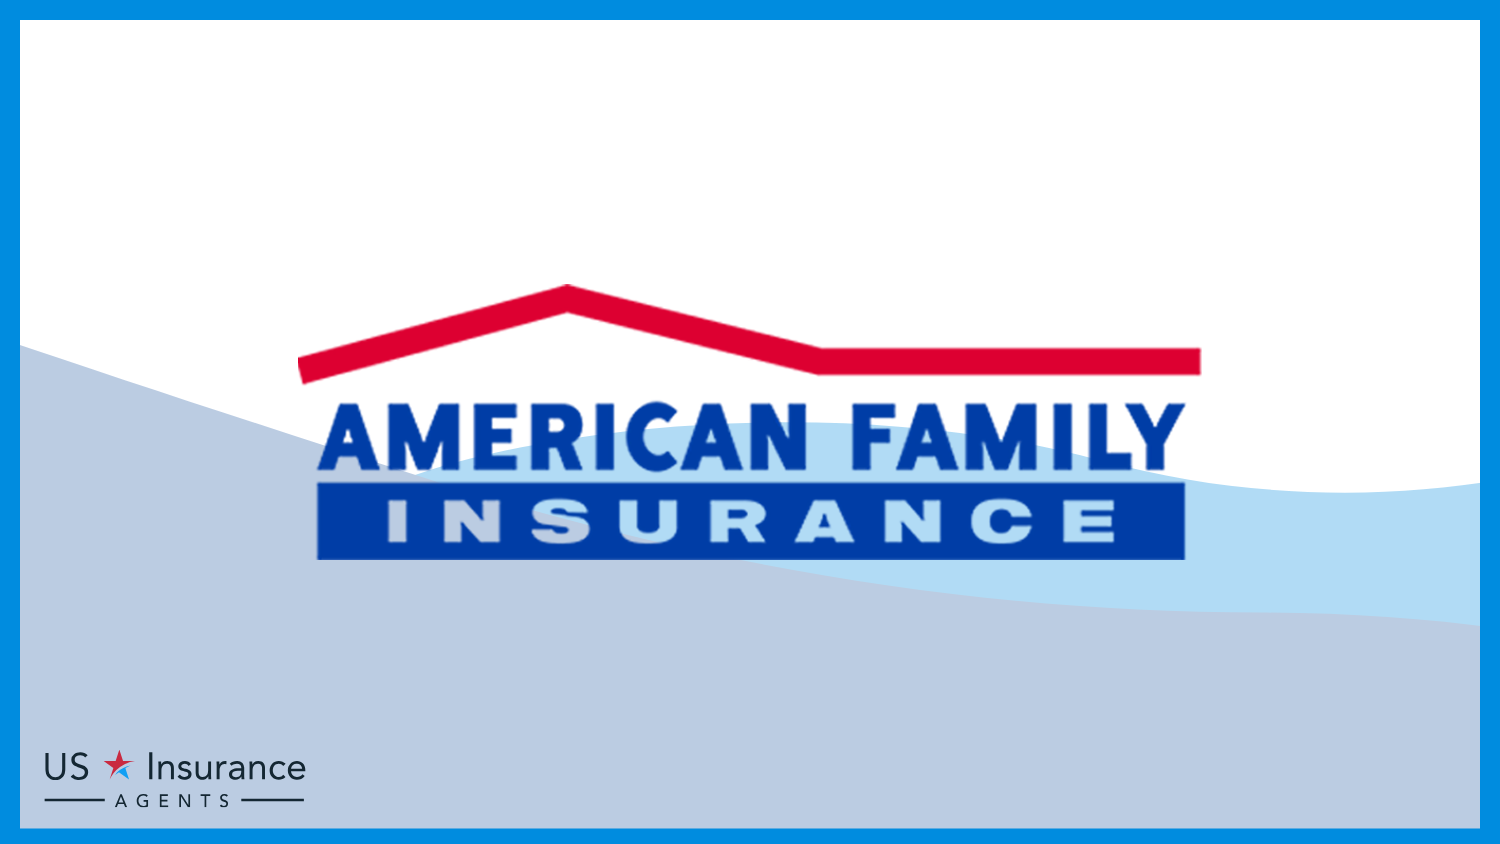 US-Insurance-Agents-Featured-Provider-Images-American-Family-Insurance